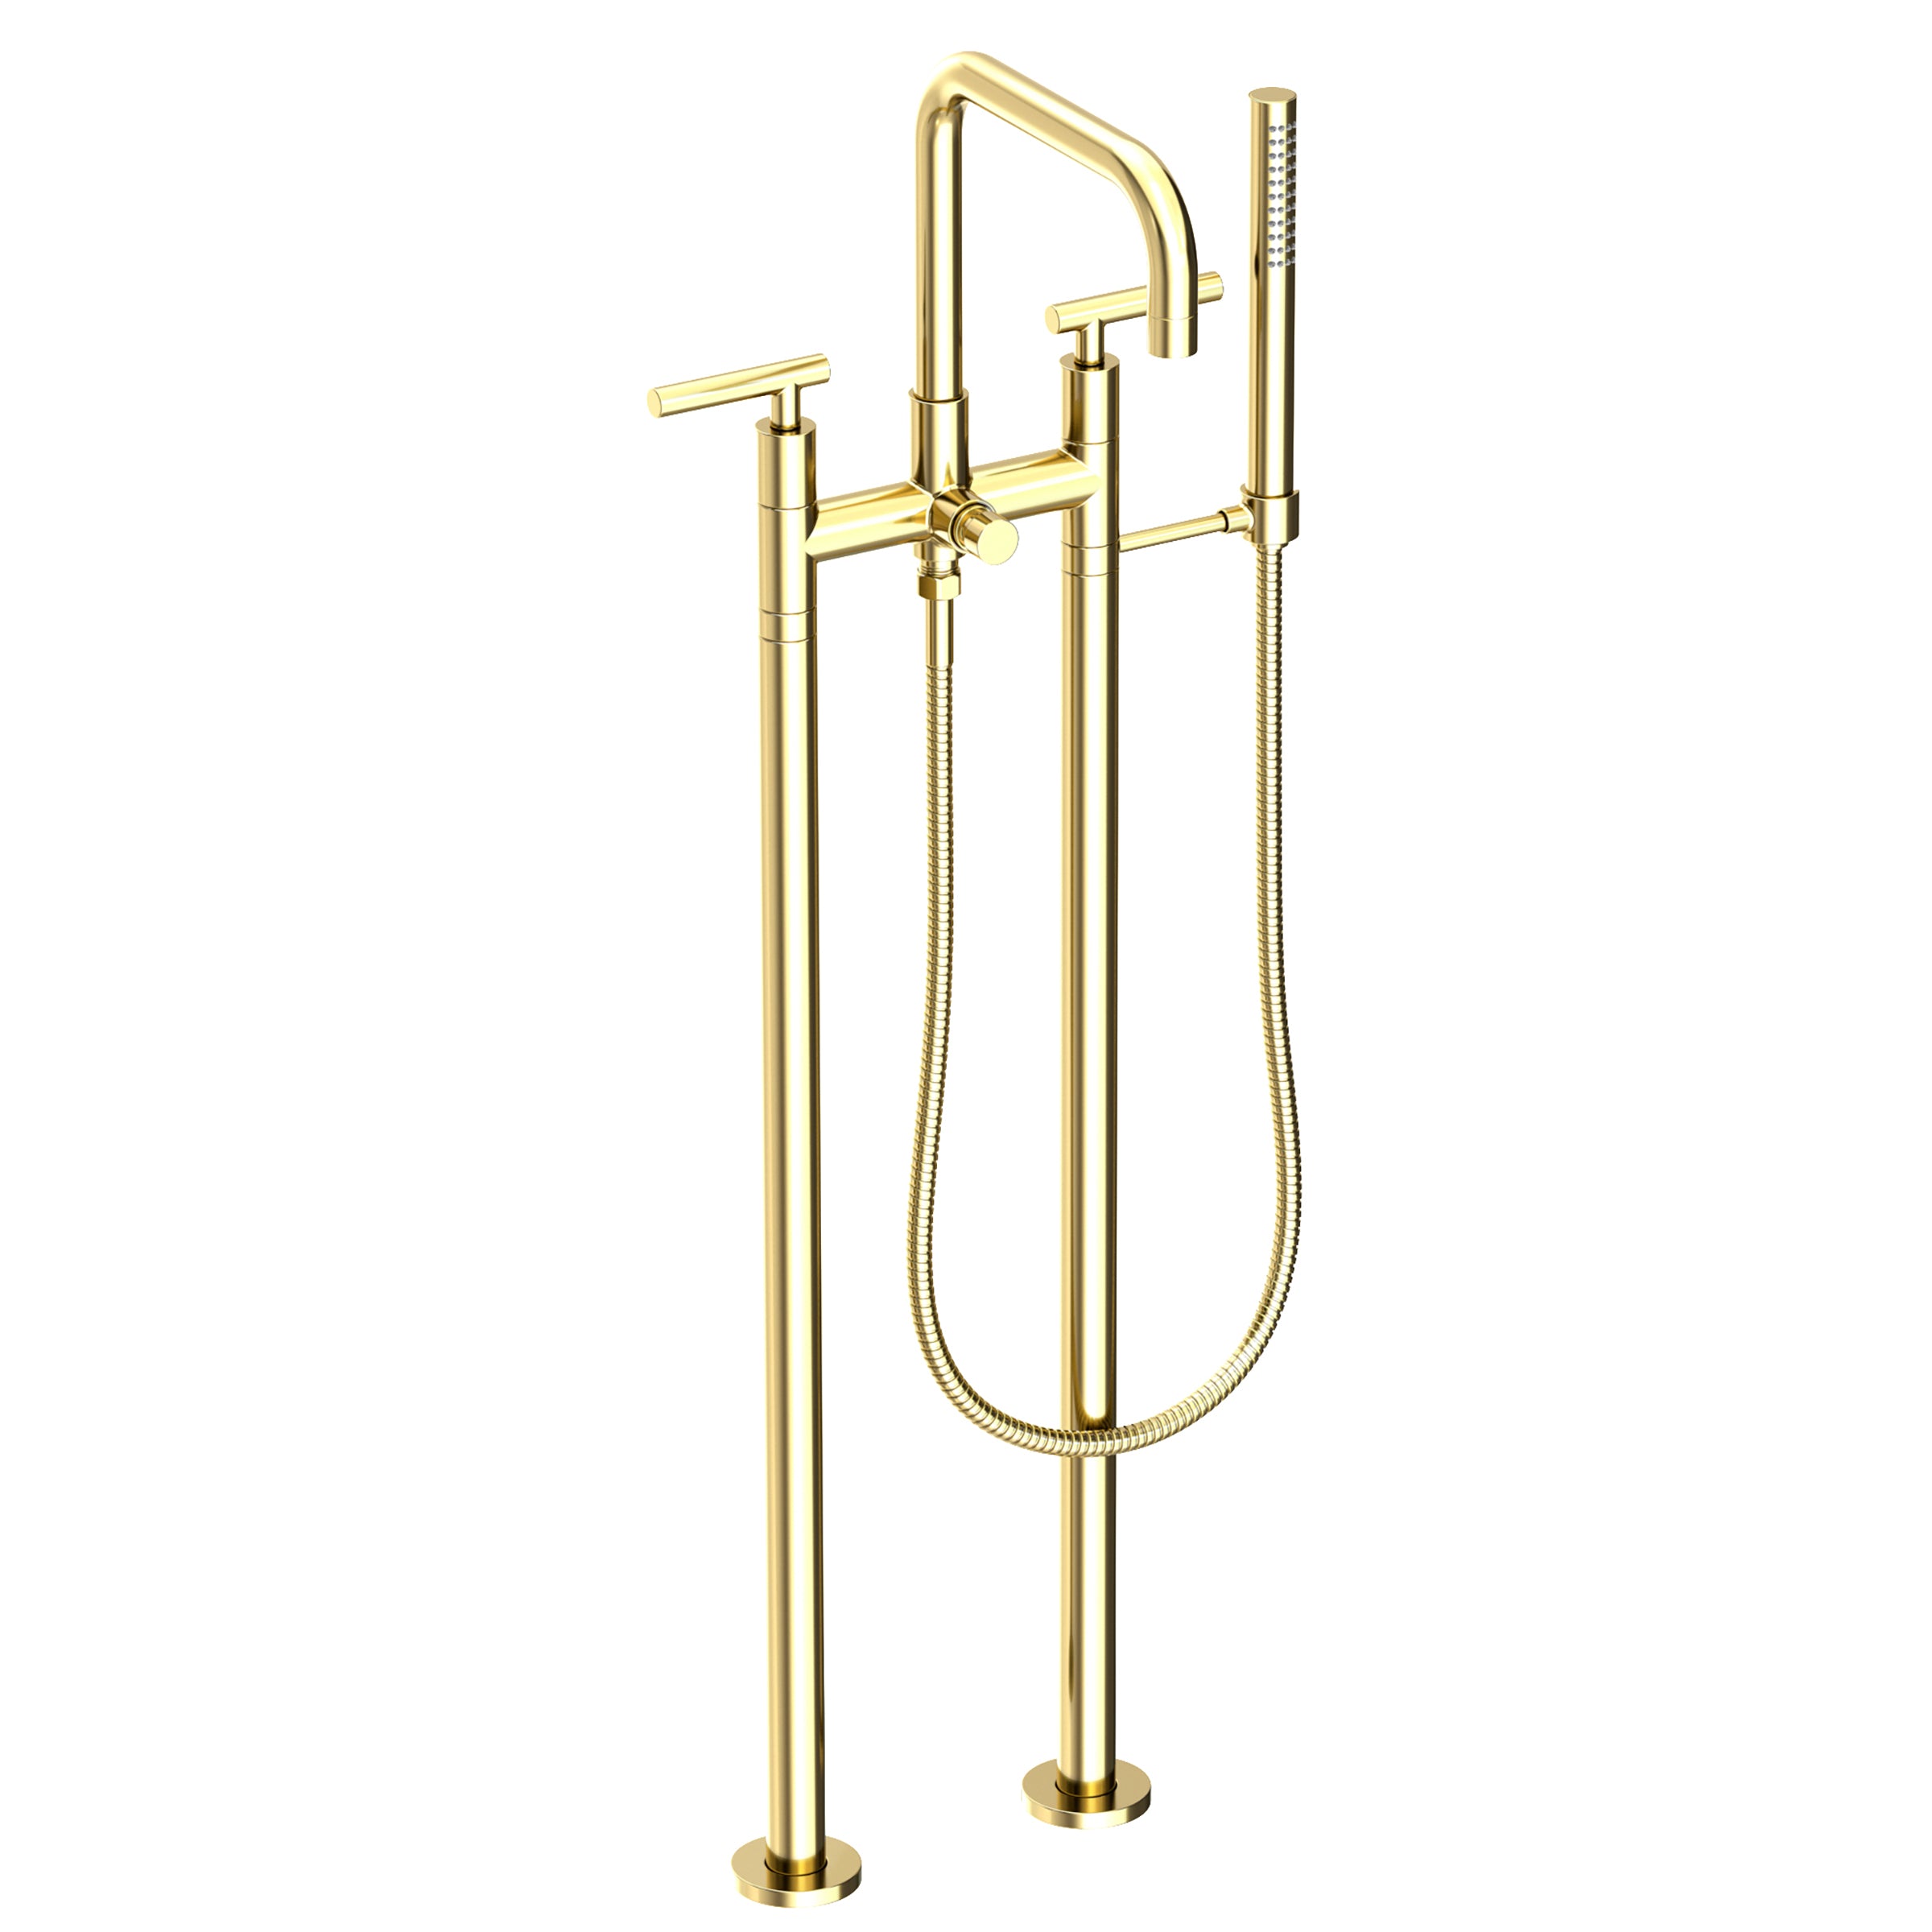 Newport Brass East Square Exposed Tub & Hand Shower Set w/Risers